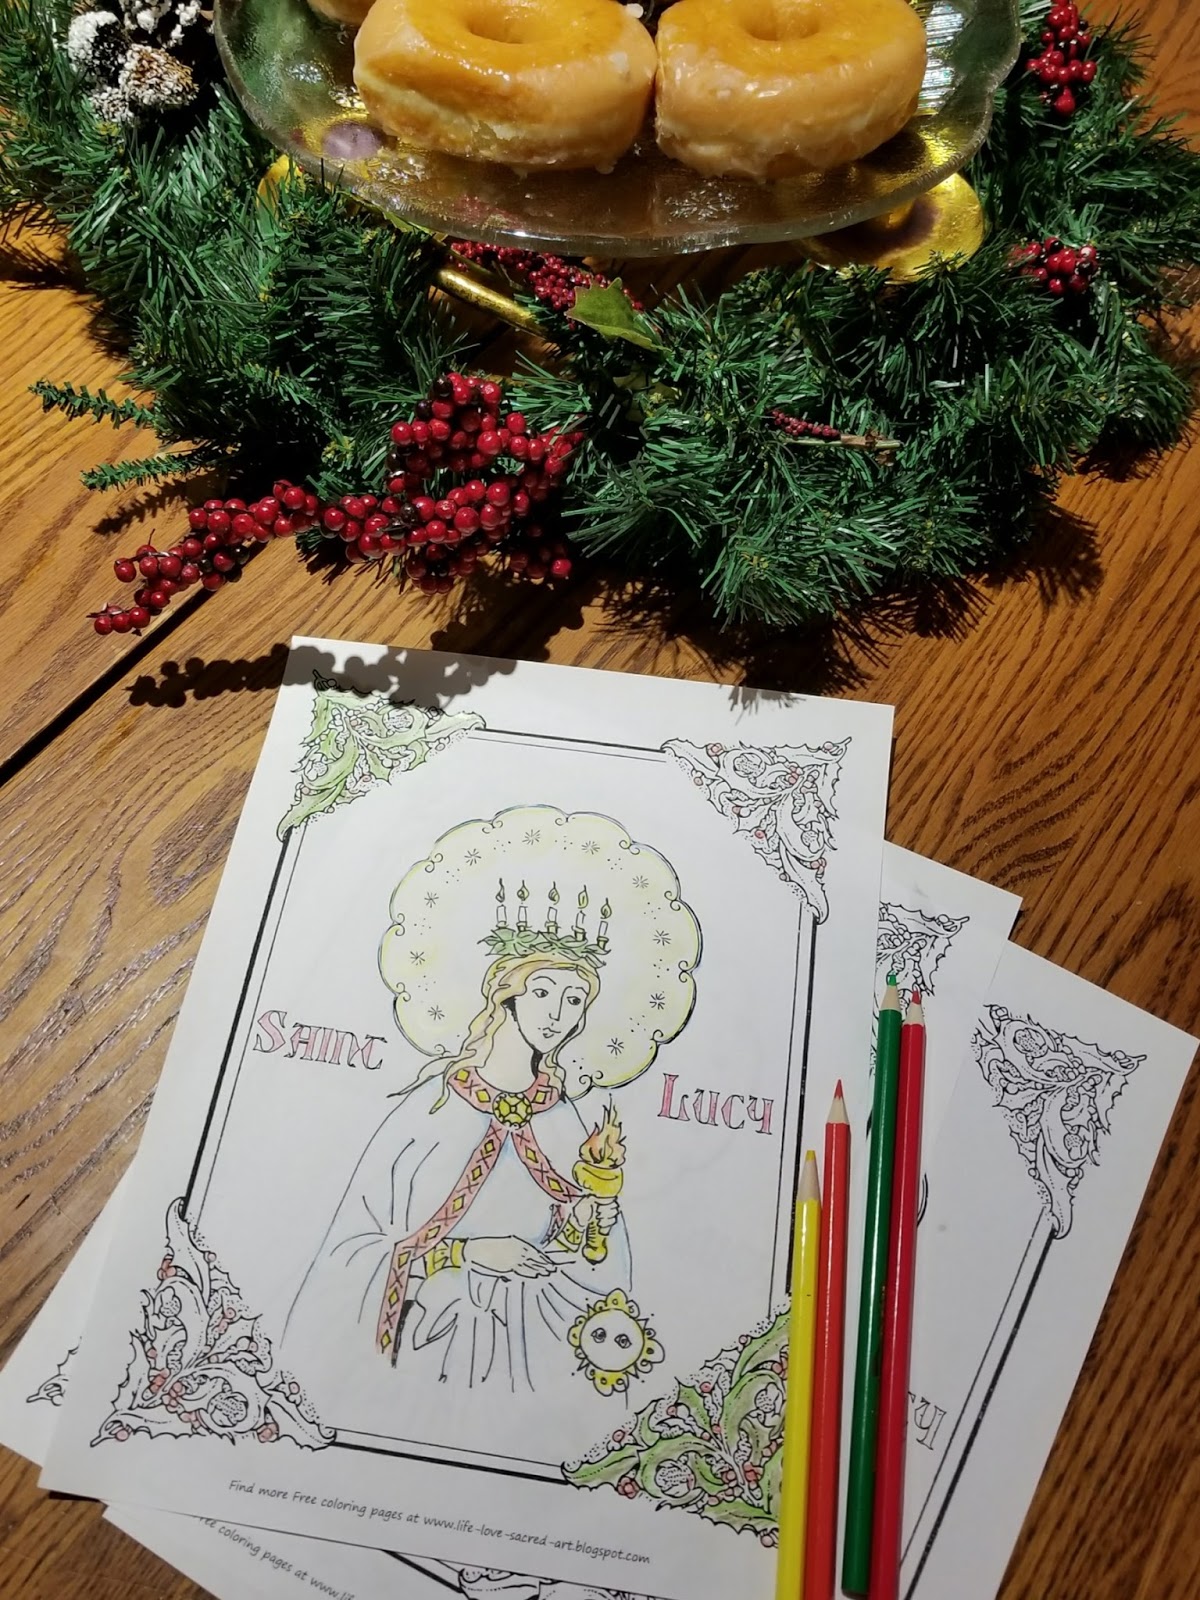 Life love sacred art free st lucy coloring page